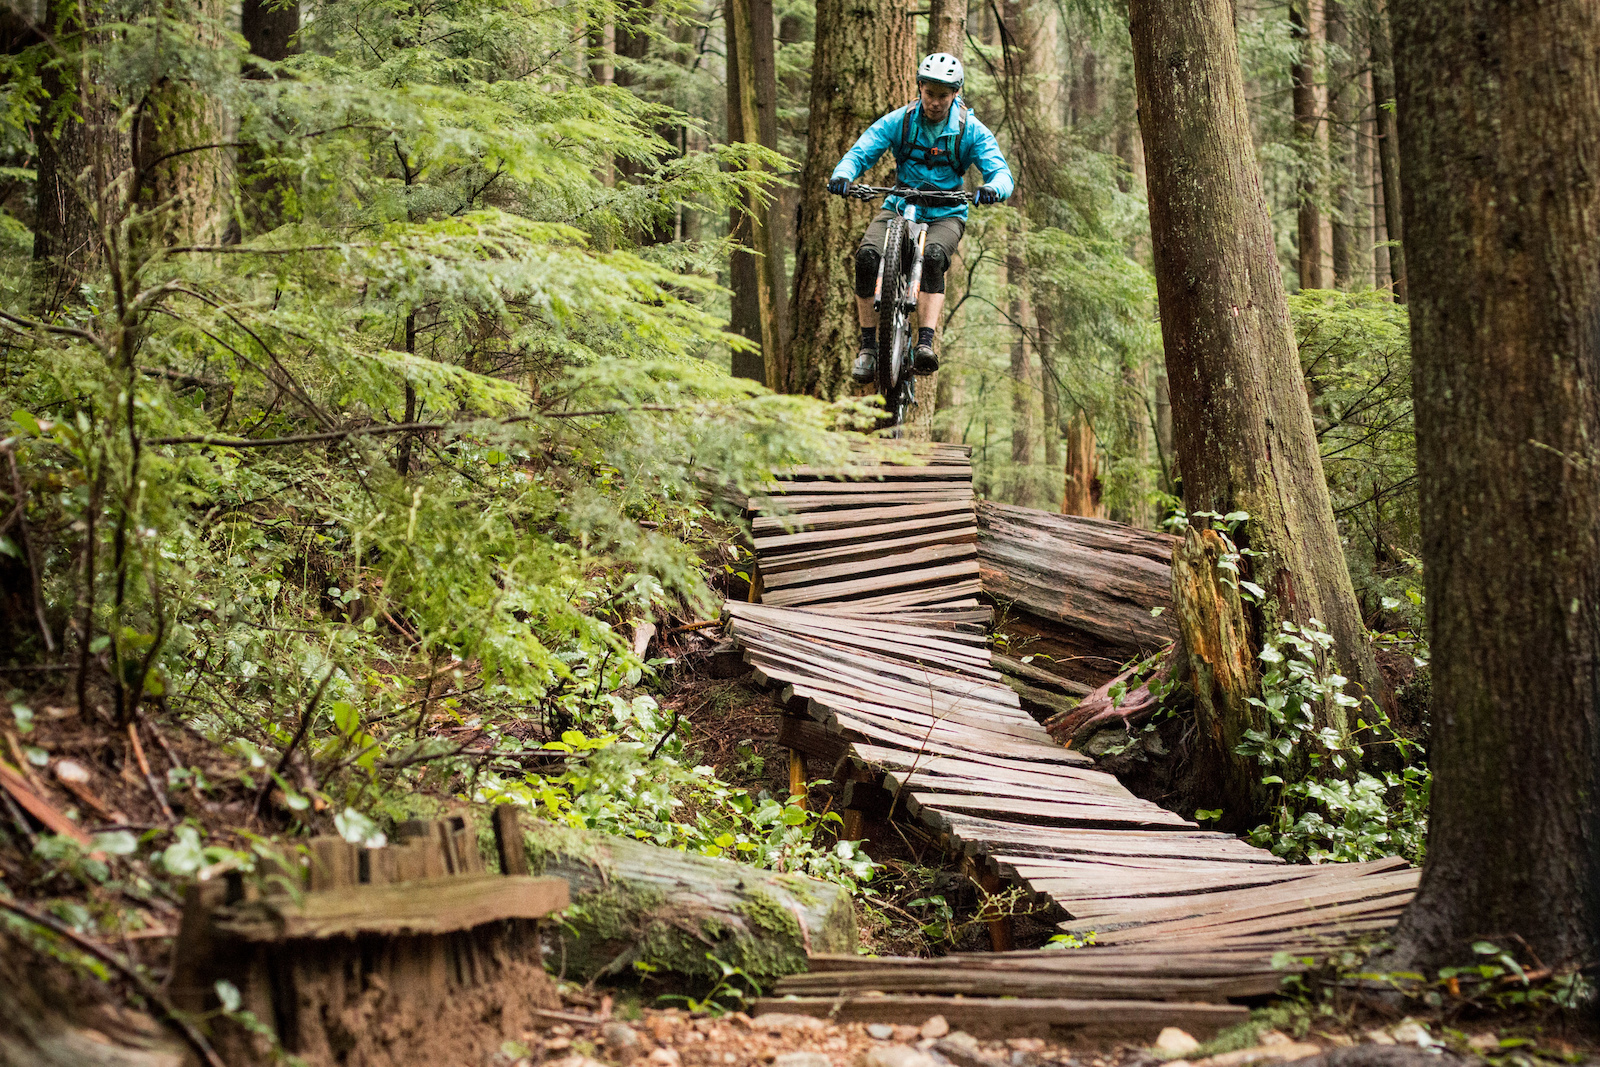 Finding Flow on the North Shore - Video - Pinkbike
